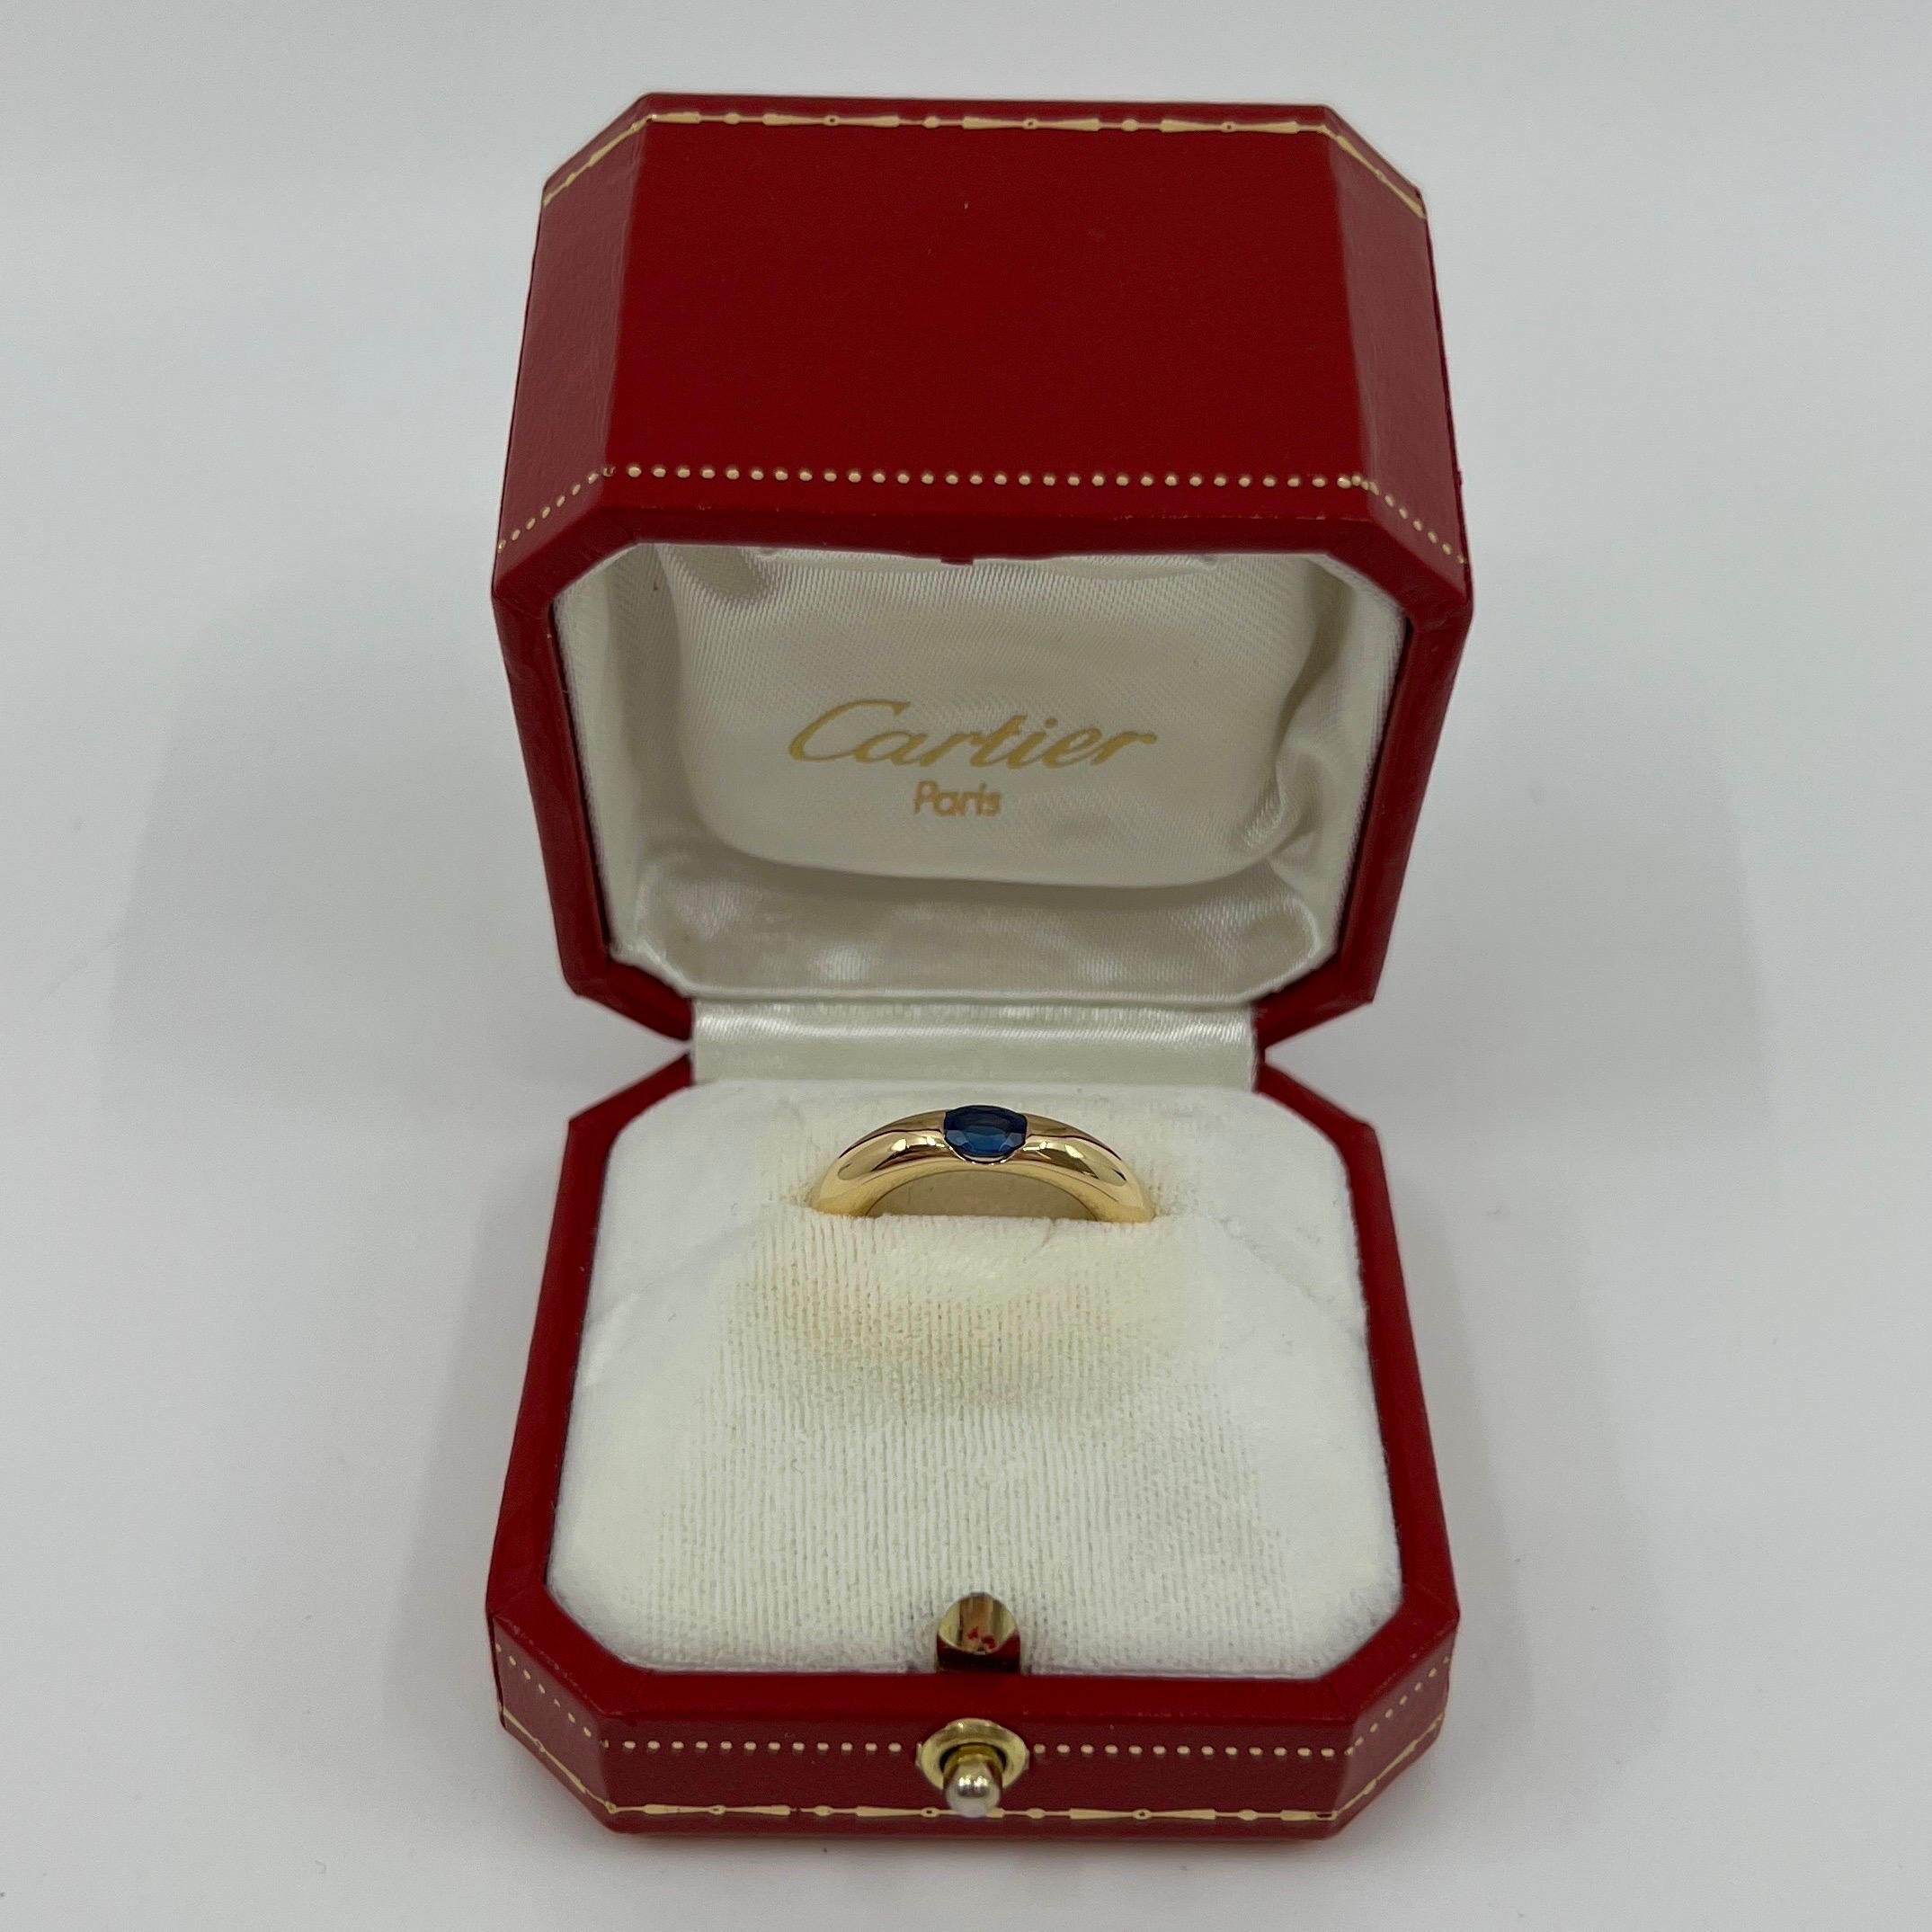 Vintage Cartier Blue Sapphire Oval Ellipse 18k Yellow Gold Solitaire Ring 51 2